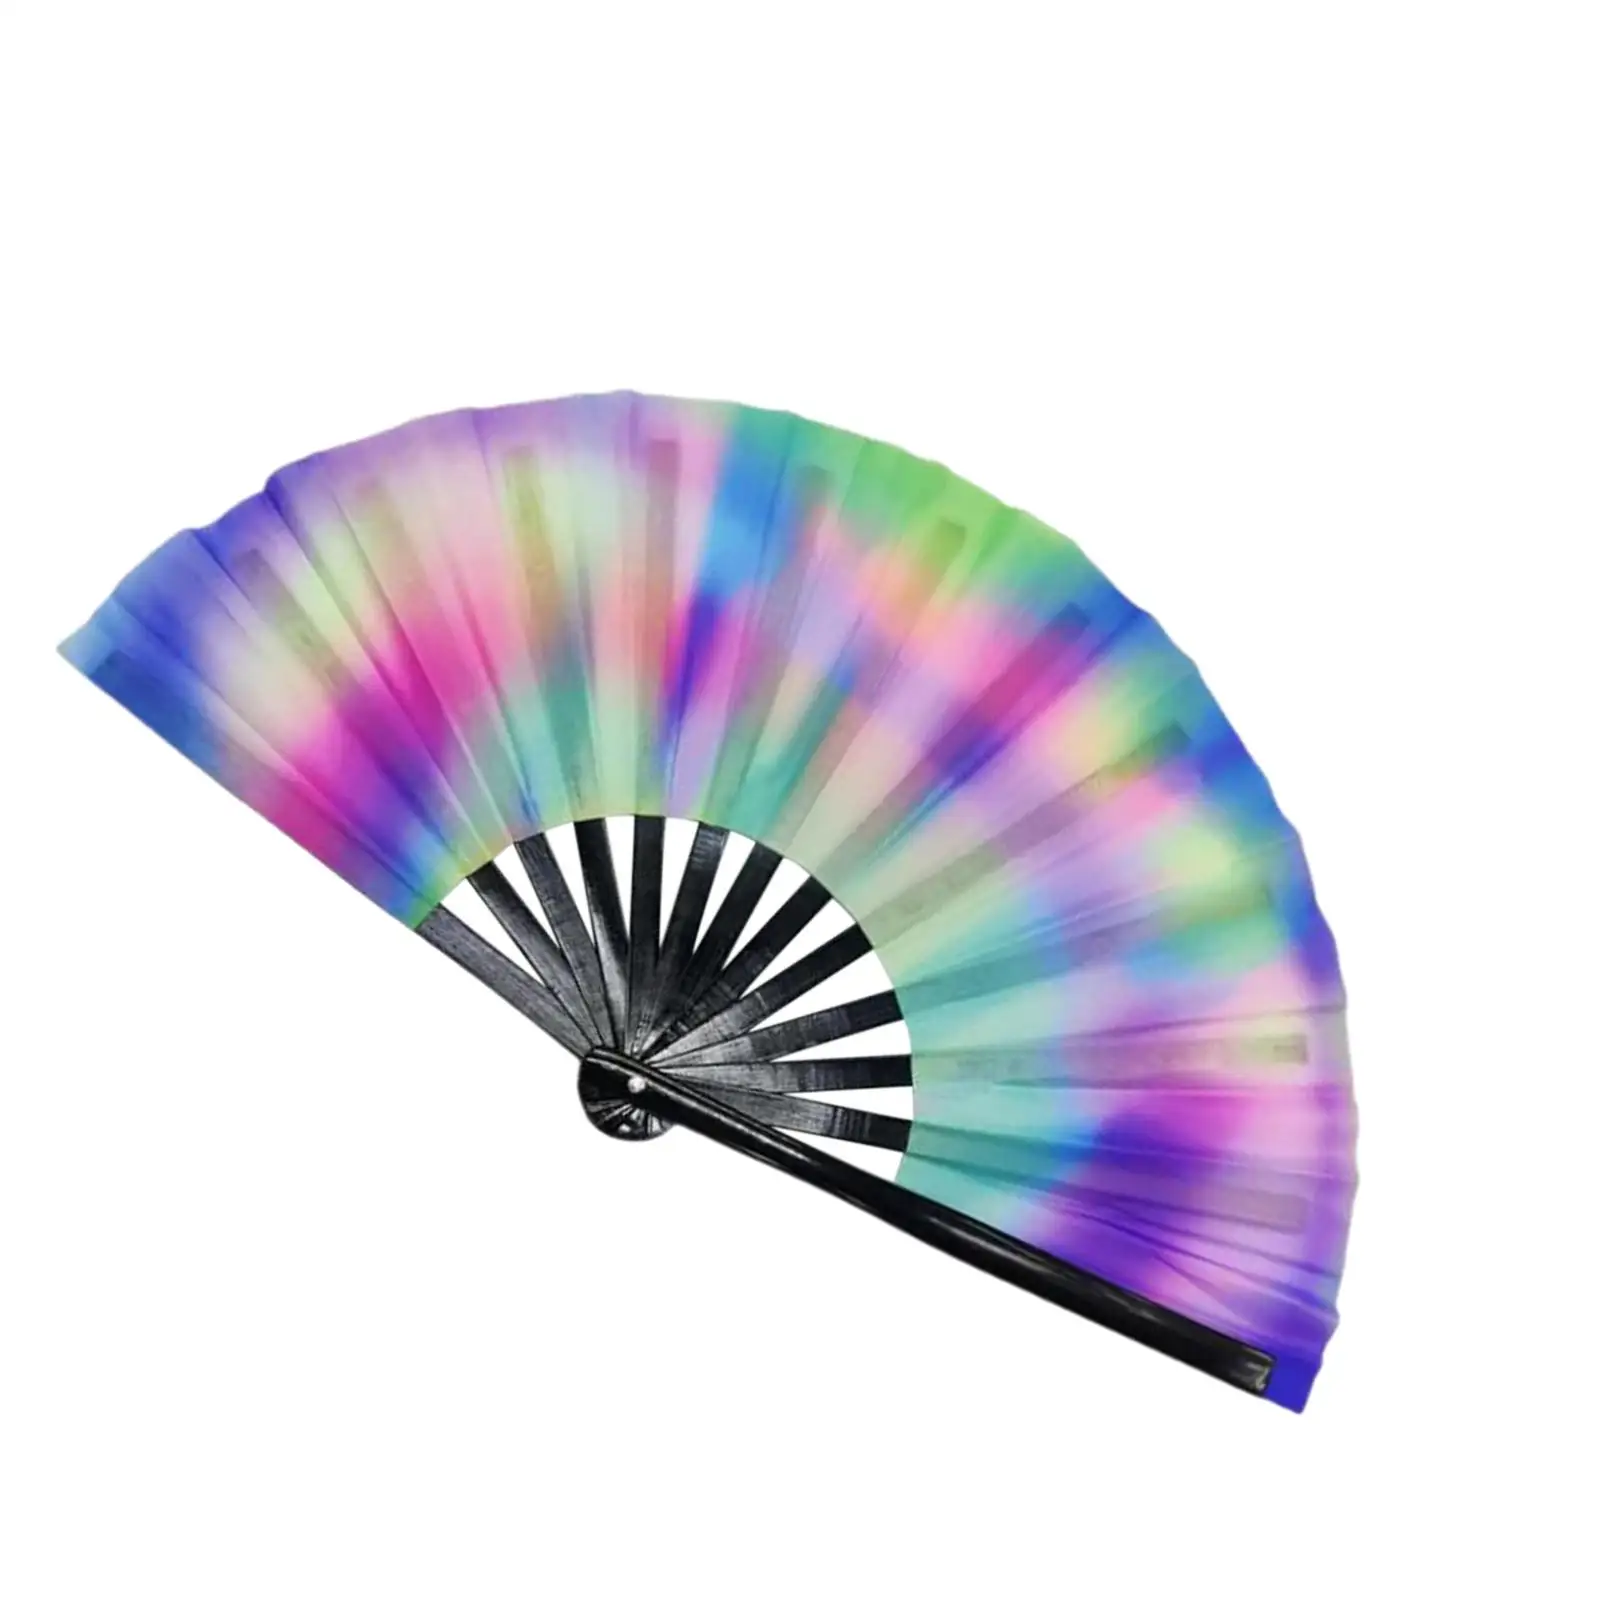 Rave Folding Hand Fan Fluorescent Effects Unisex Folding Fan for Masquerade Concerts Stage Show Performance Parties Roles Play